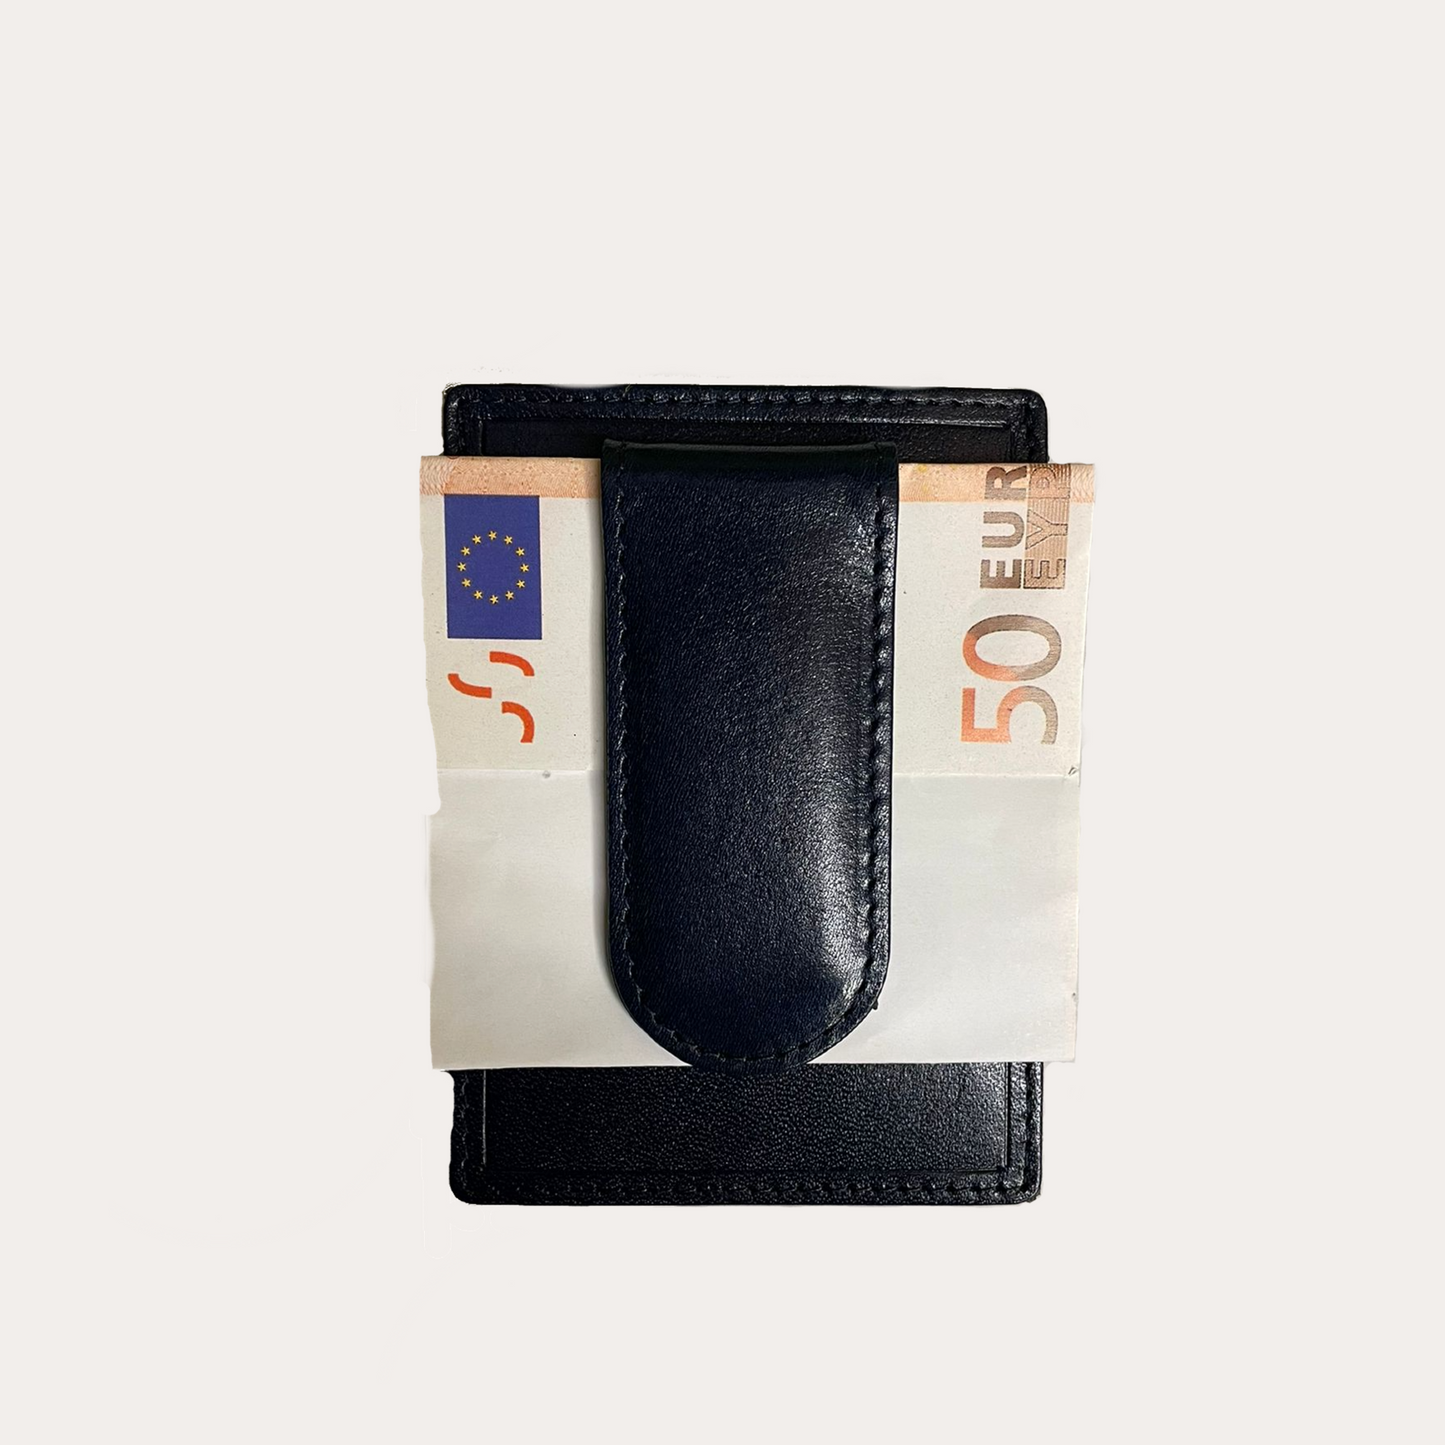 Black Leather Money Clip with Credit Card Holder